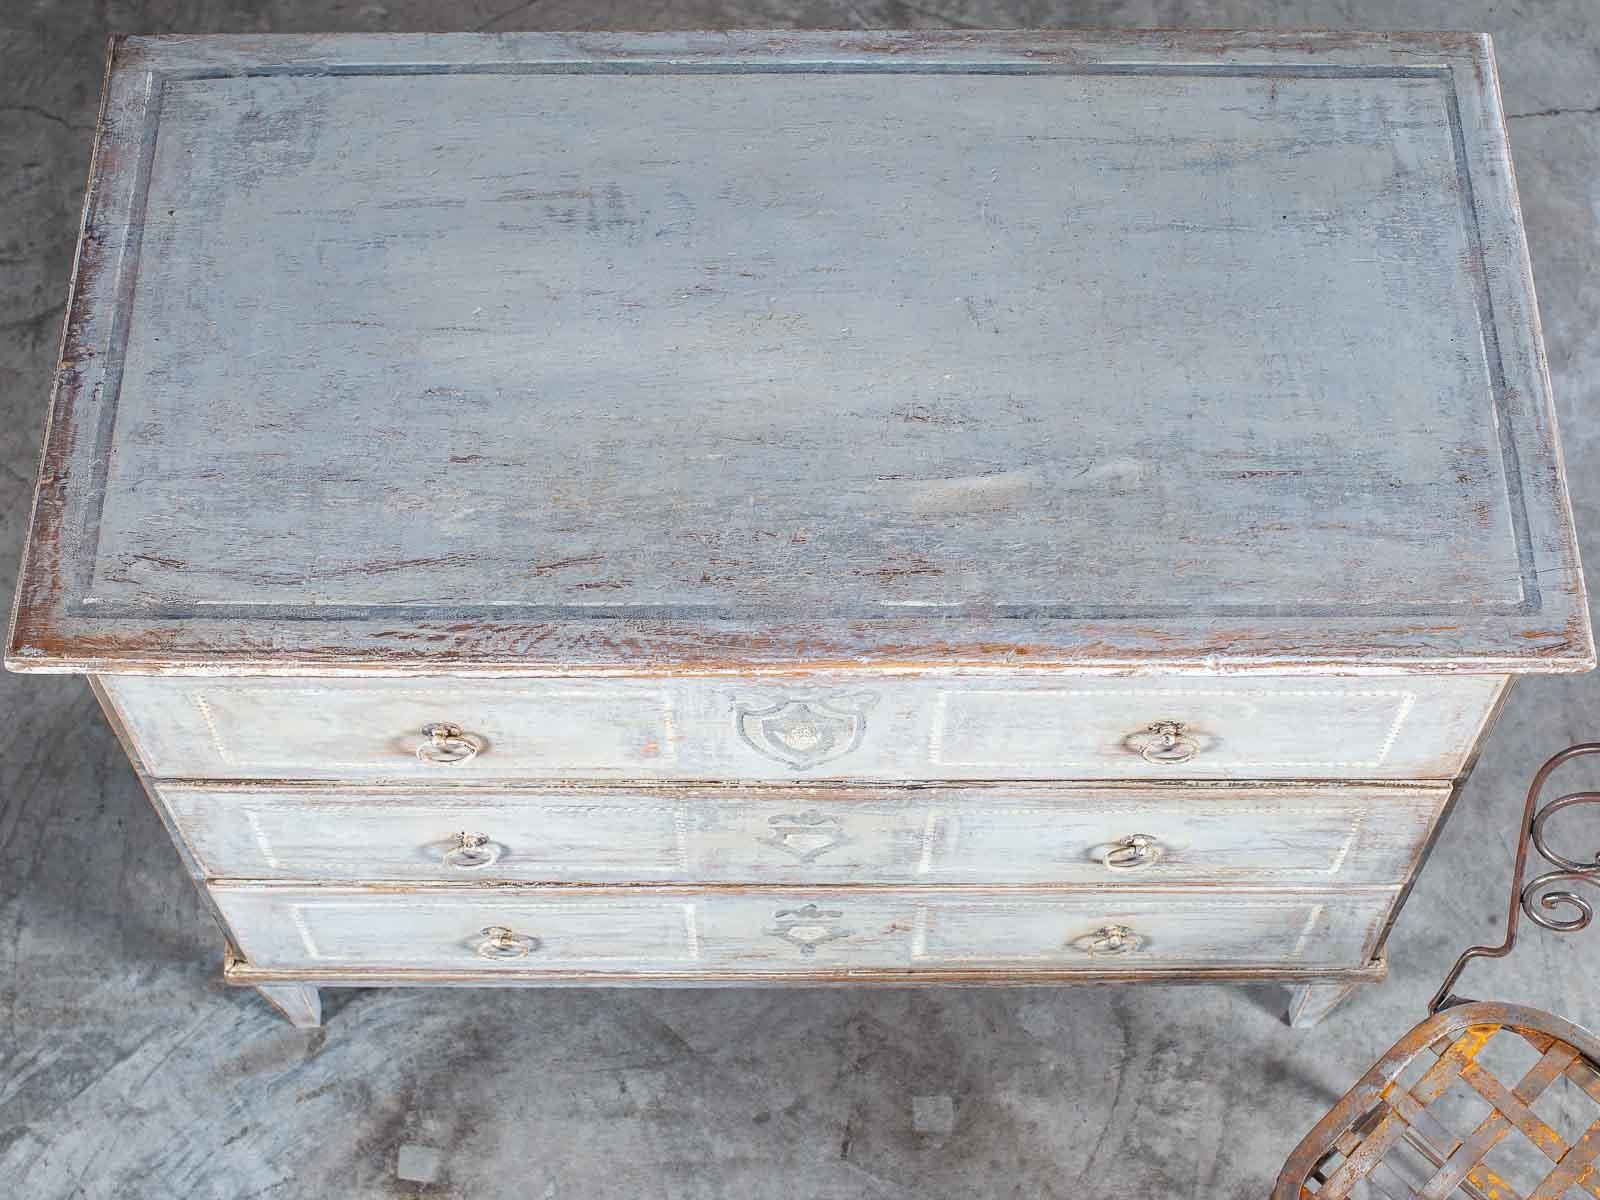 The clean and simple lines of this antique Austrian painted chest of drawers circa 1830 relate to the neoclassical style in vogue at the end of the 18th century. This antique chest has three drawers all the same size with a rounded edge that lays